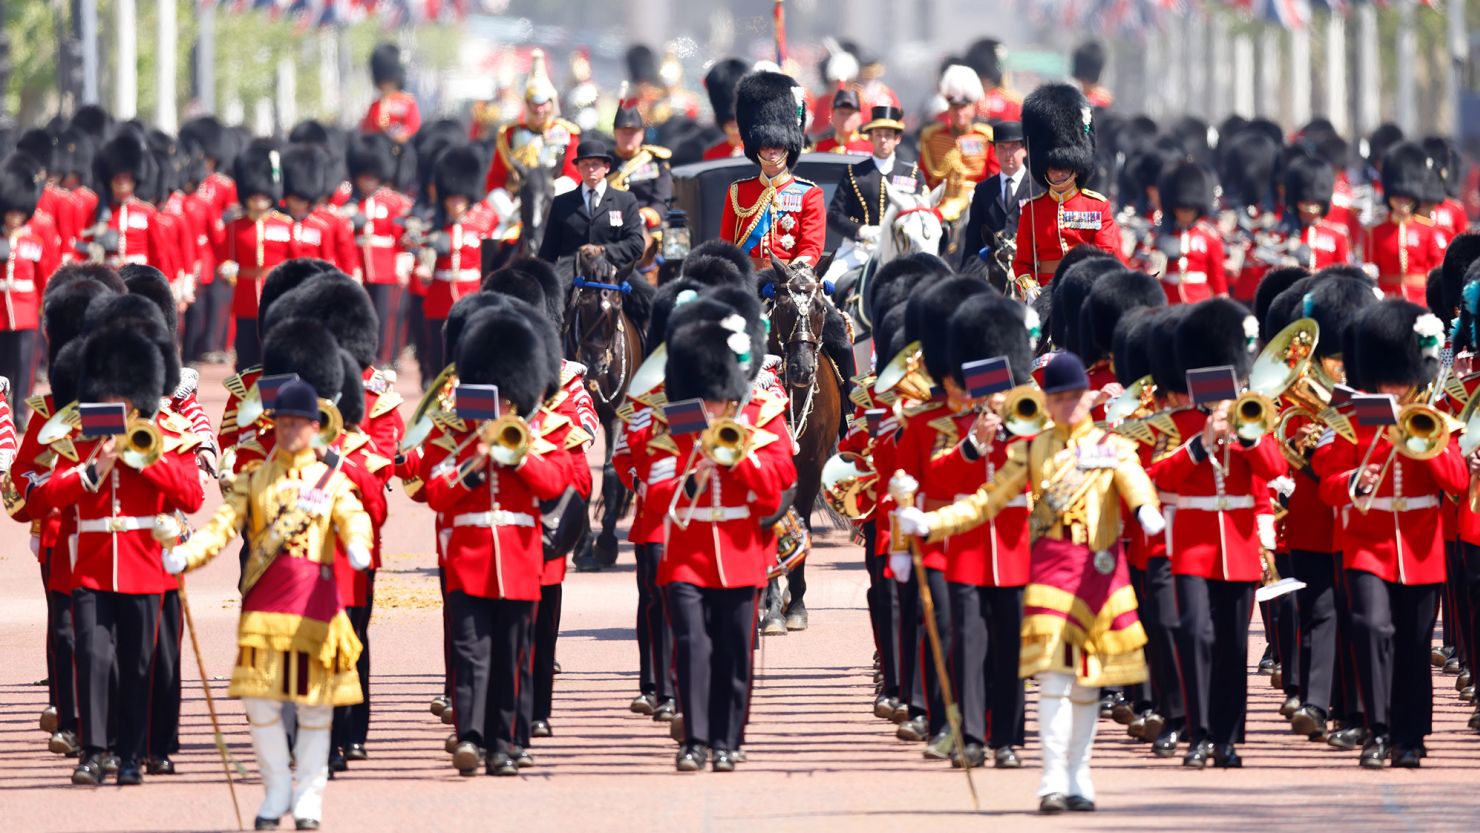 Prince William returns to Buckingham Palace on horseback on June 10, during final rehearsals for the King's Birthday Parade, known as Trooping the Colour, which takes place on Saturday.